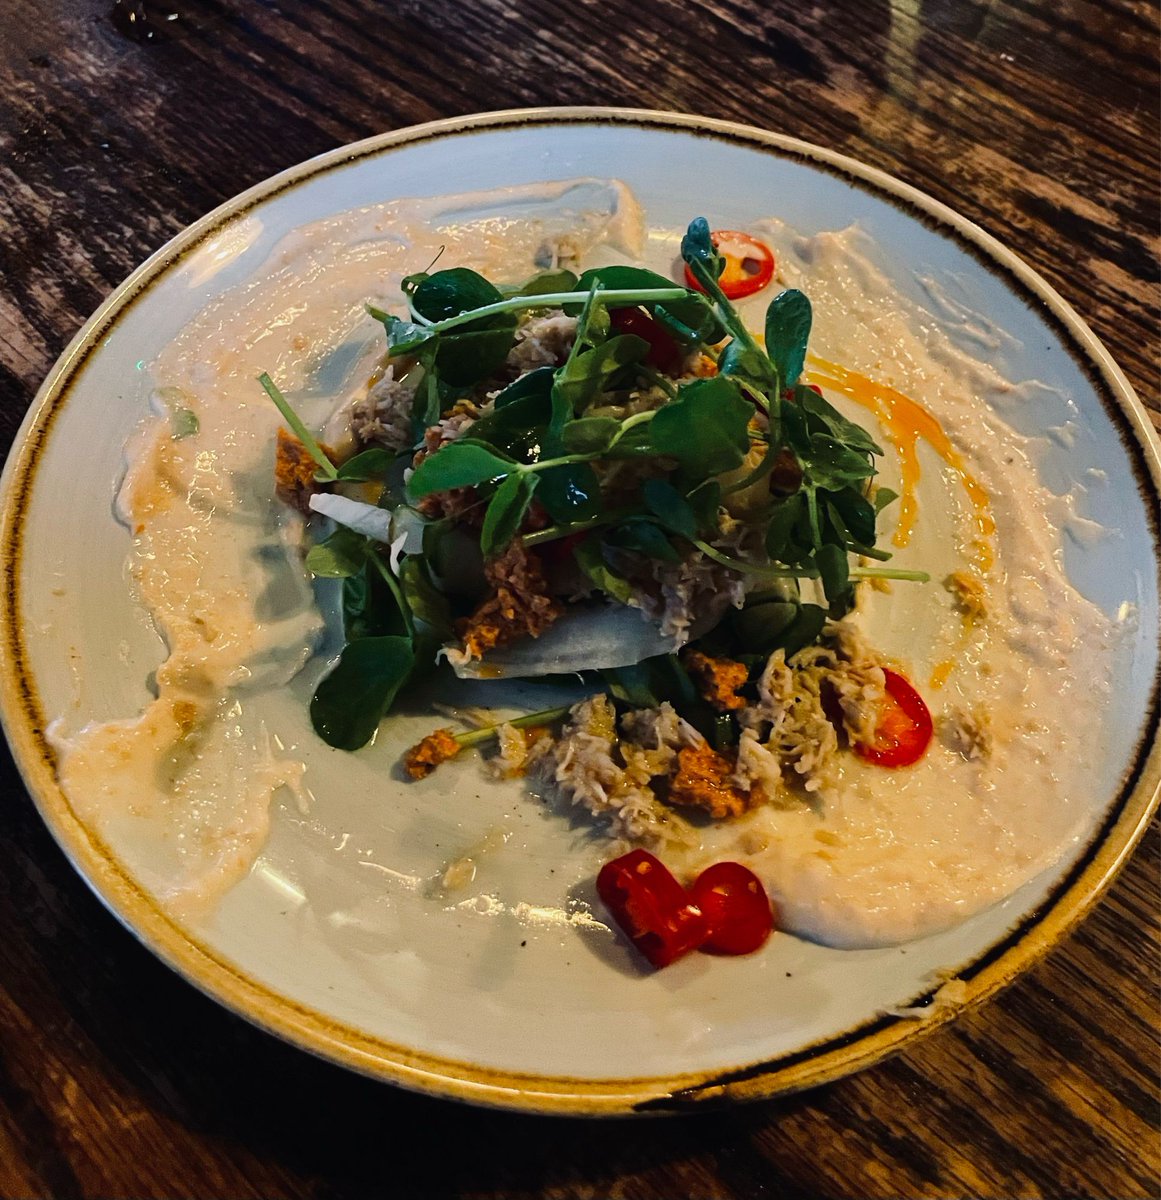 It's friday? Time to highlight another one of our delicious fish dishes, created by head chef Lucas.

This time... one of our most popular starters: devon crab salad. Brown crab mayo, pickled fennel, cucumber, watercress & chili. buff.ly/40VdfGk
#youngschefs #fishfriday